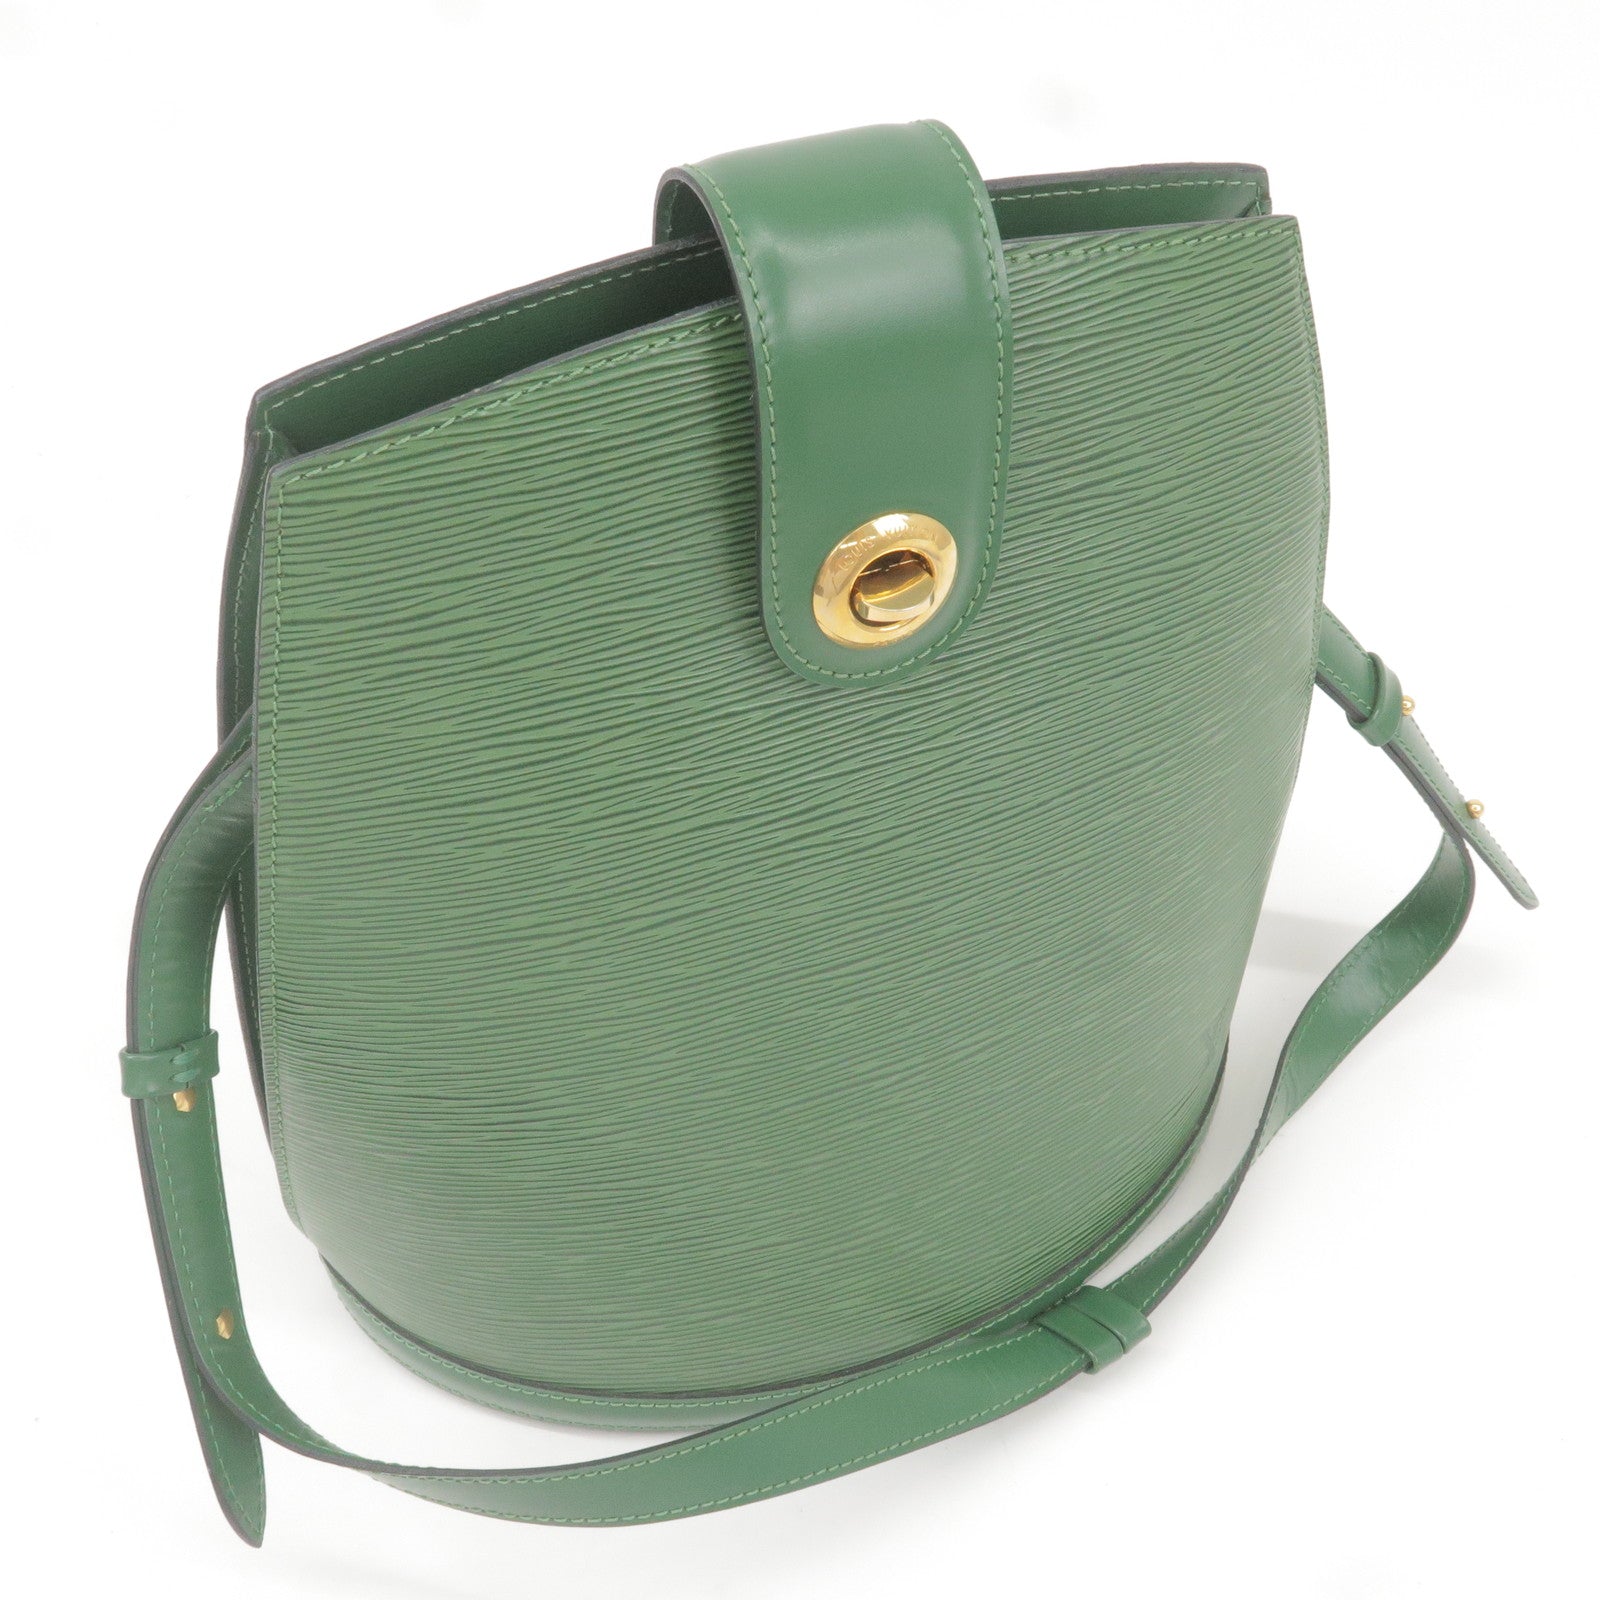 Louis Vuitton Vintage Green Epi Leather Cluny Bag // Available in store!